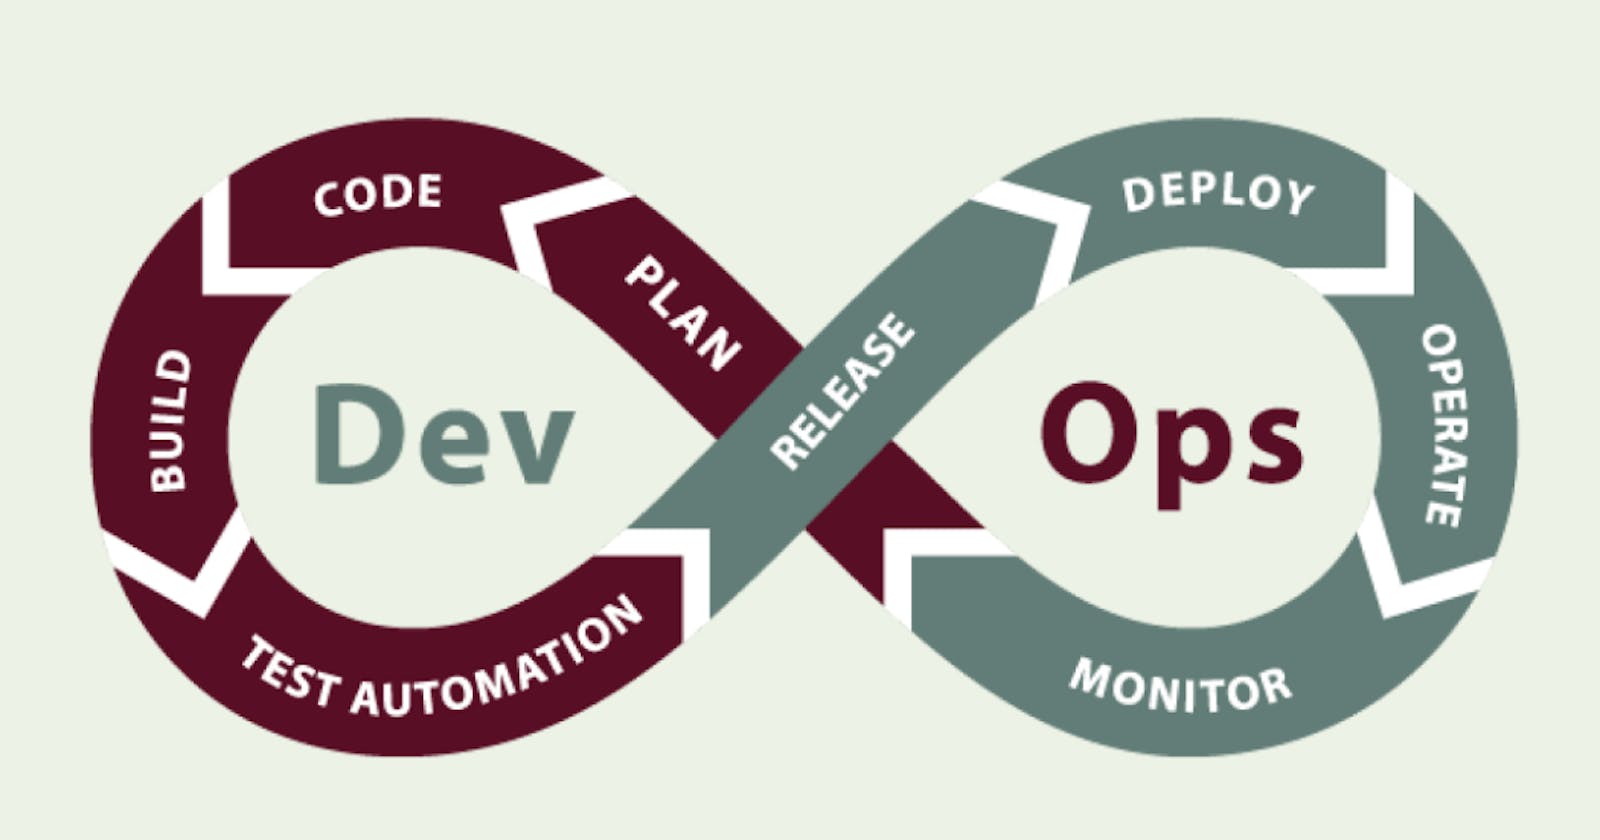 Started journey with DevOps !!
DAY#1